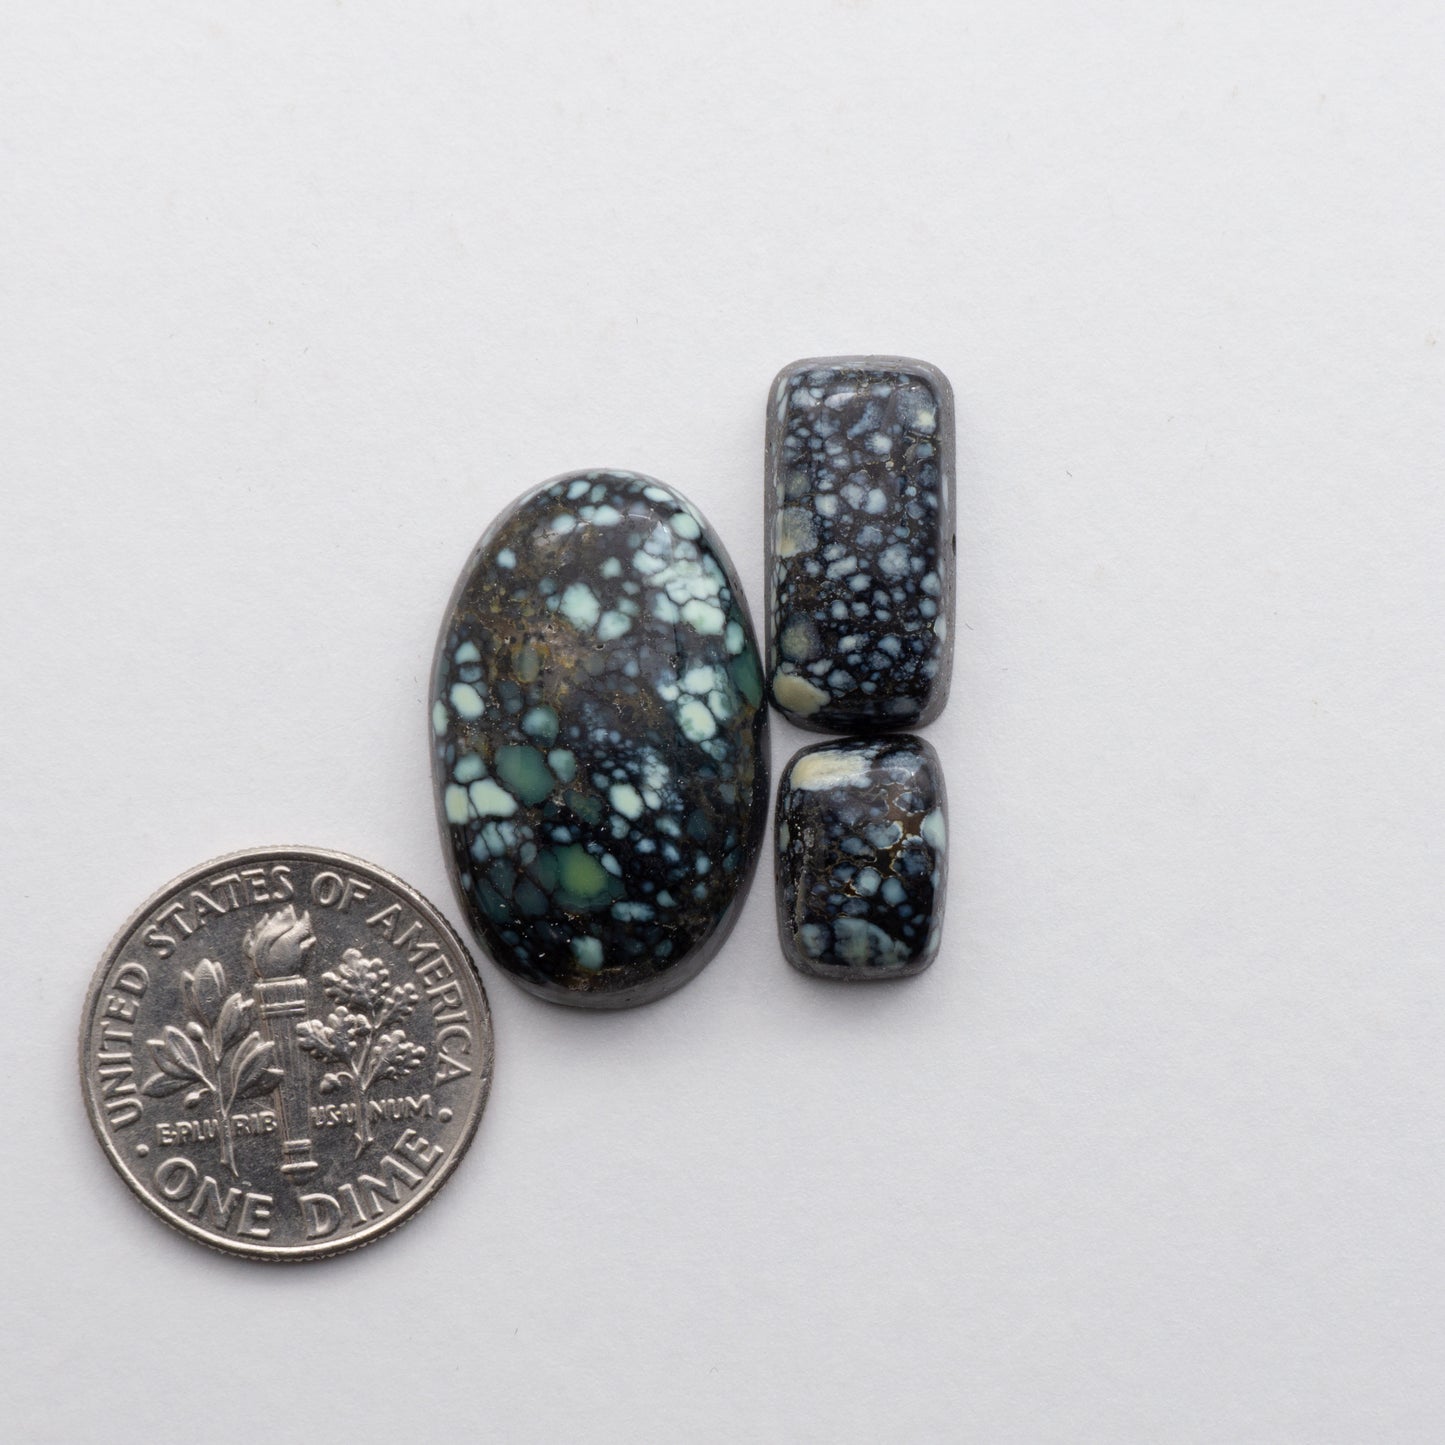 This Nevada Variscite Cabochon lot has a glossy finish and is backed for added strength. Mined in Nevada, USA